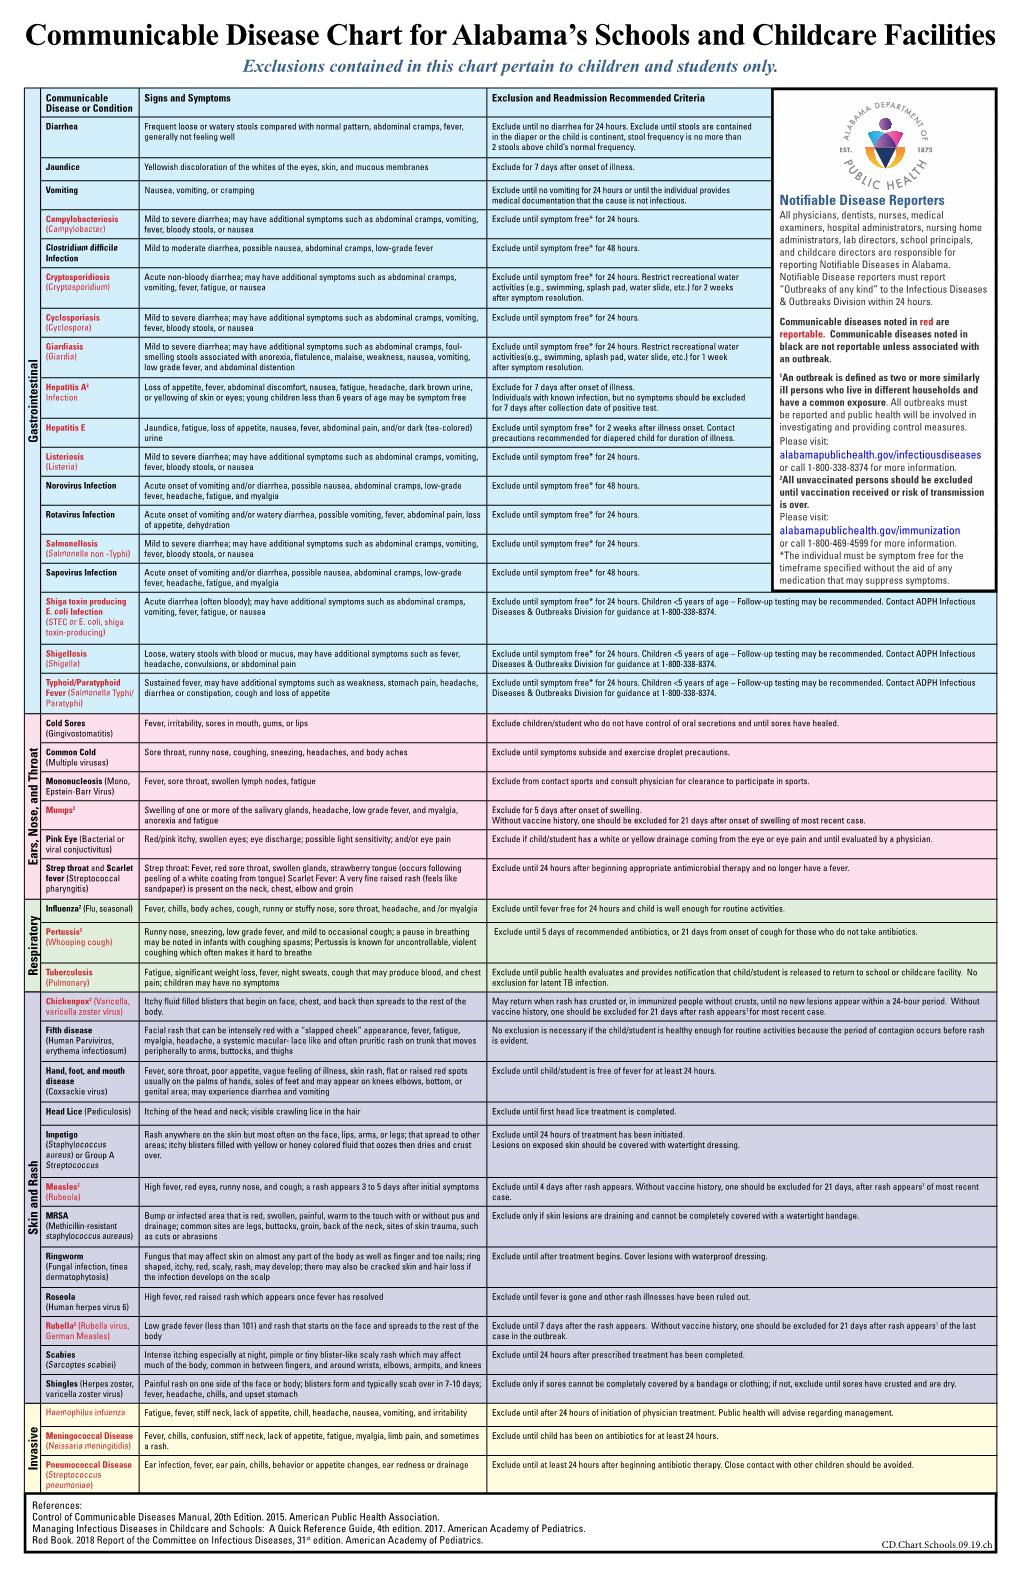 Communicable Disease Chart for Alabama's Schools and Childcare